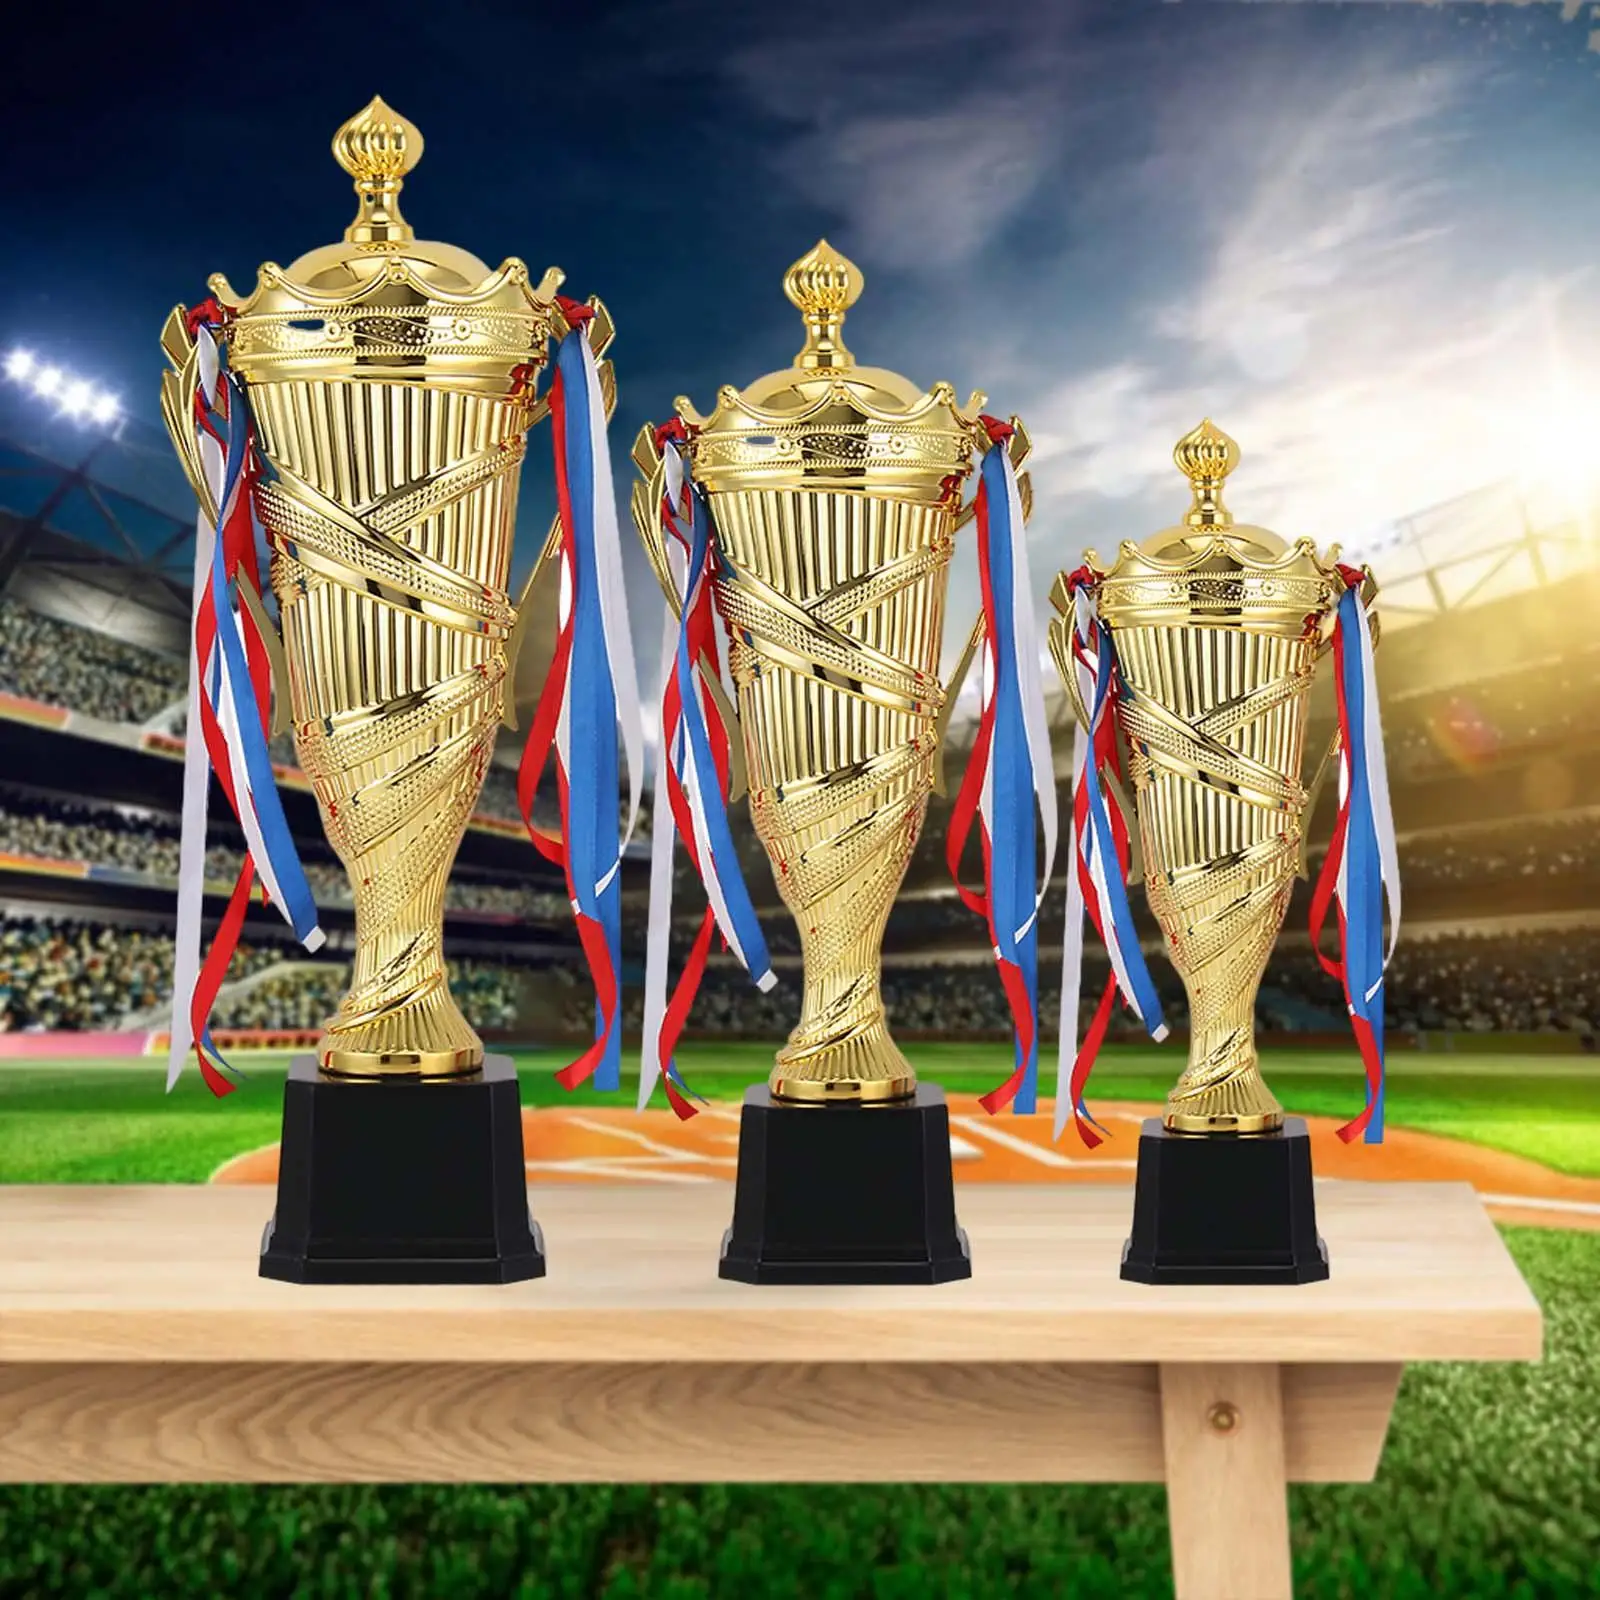 Adults Trophy Mini Trophy Awards Award Trophy Cup for Basketball Celebrations Appreciation Gifts Party Sports Tournaments